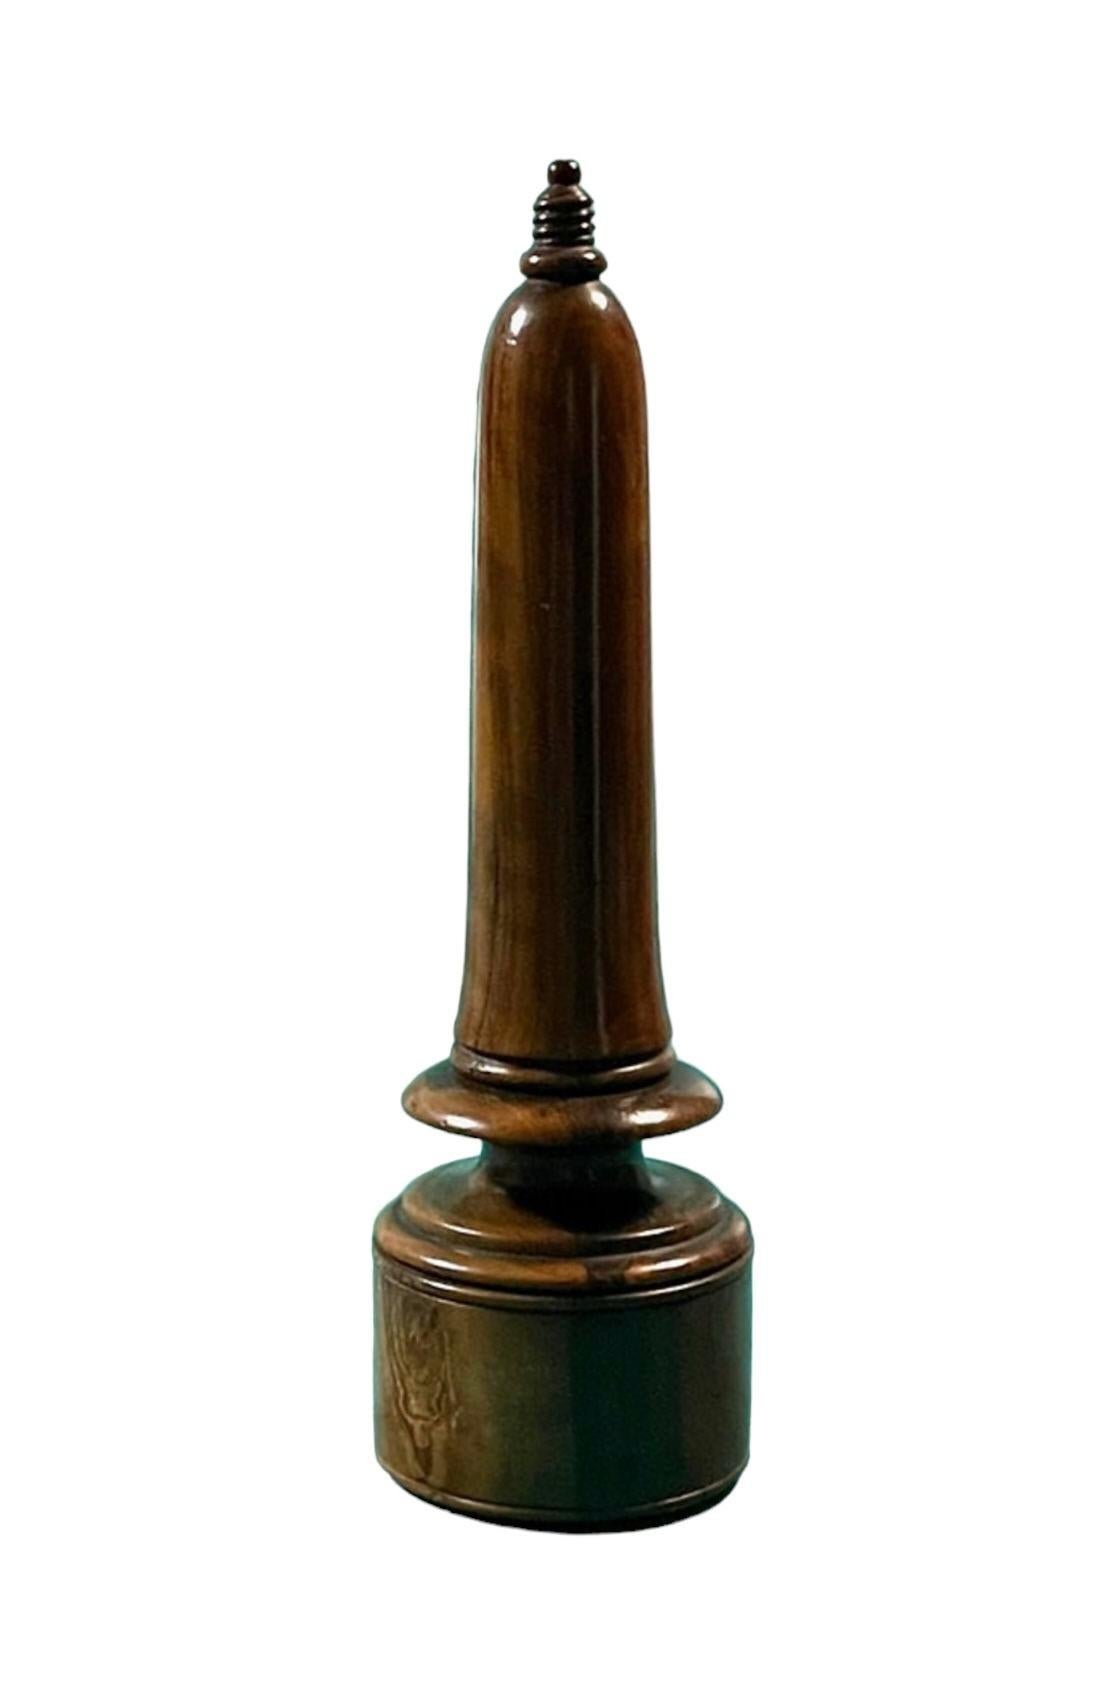 Campaign Antique Treen Traveling Candlestick and Match Holder, 19th Century For Sale